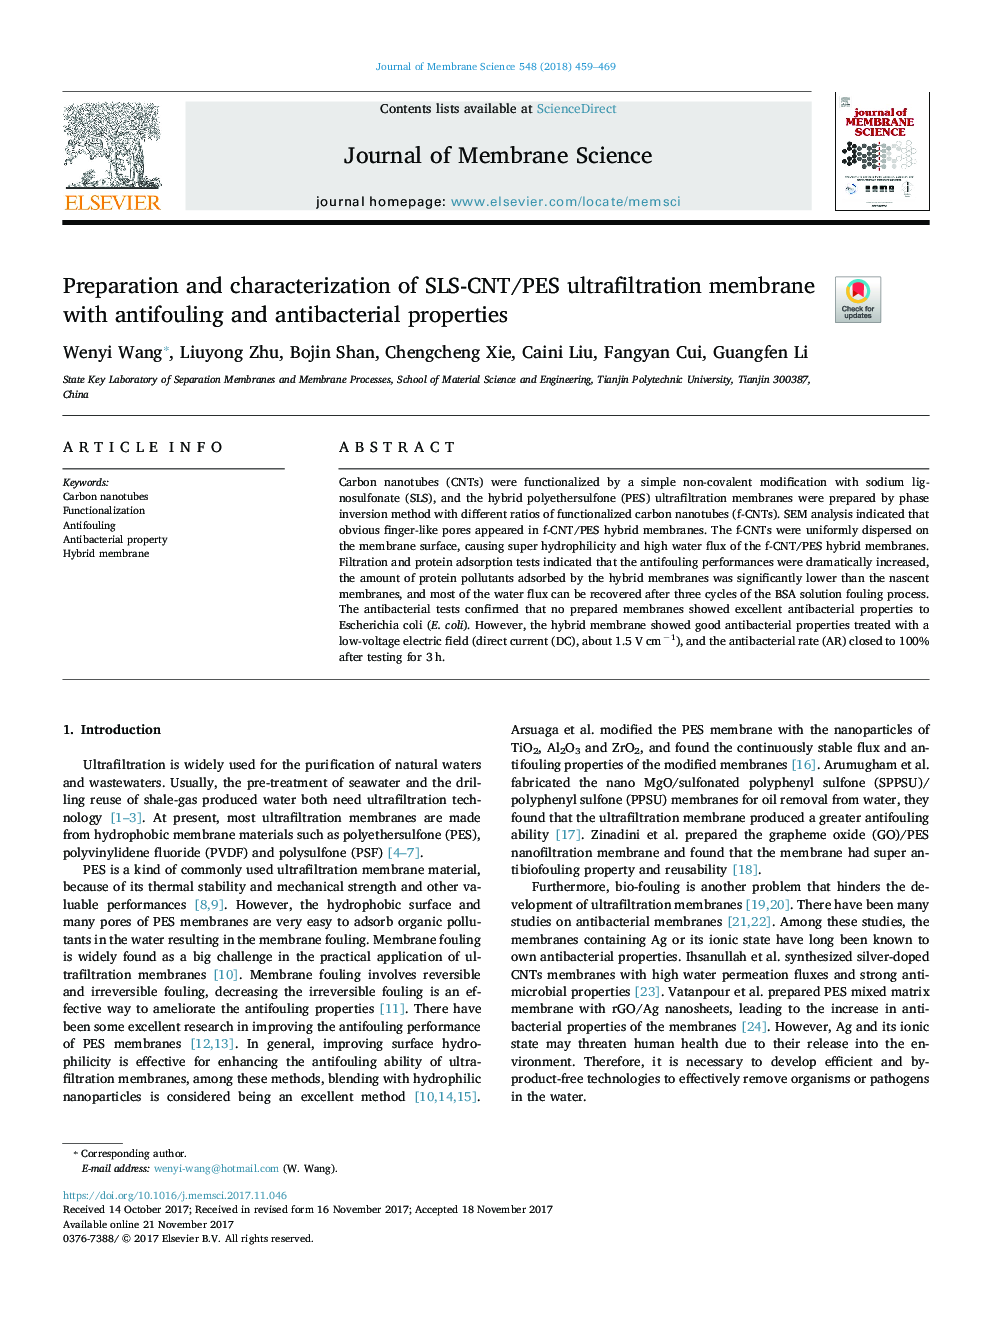 Preparation and characterization of SLS-CNT/PES ultrafiltration membrane with antifouling and antibacterial properties